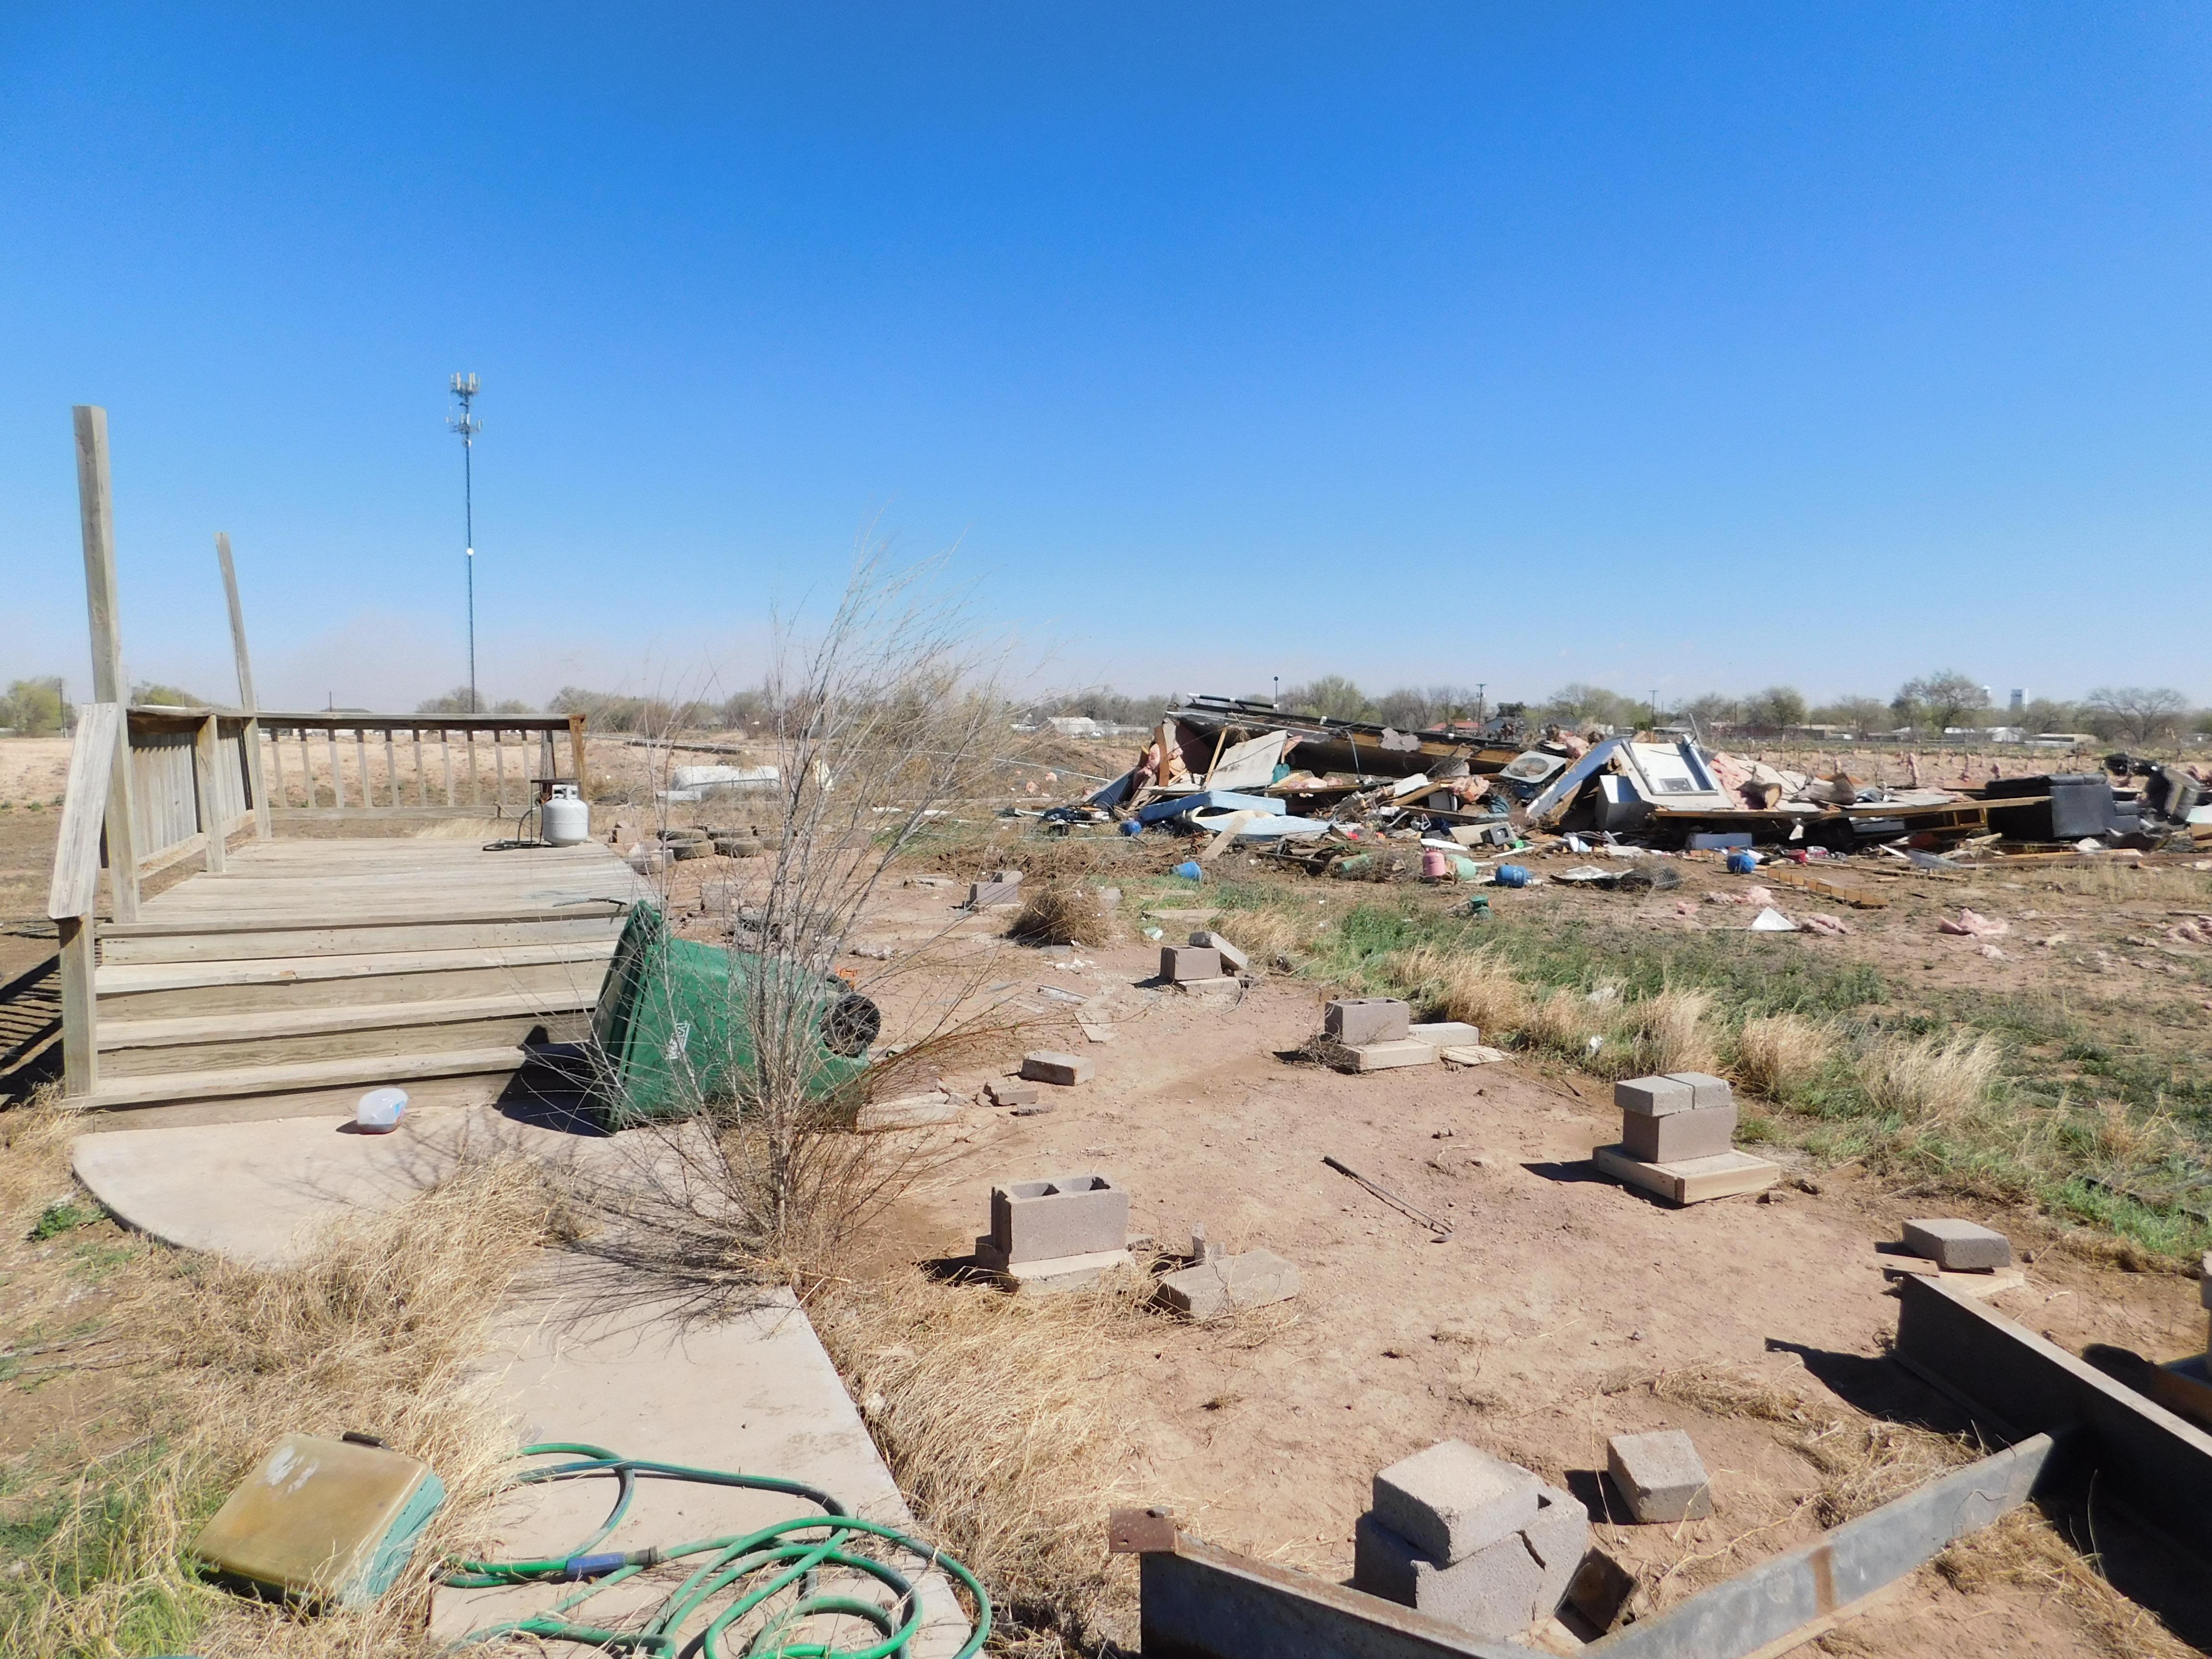 Damage from the Dexter, New Mexico tornado of March 12, 2019